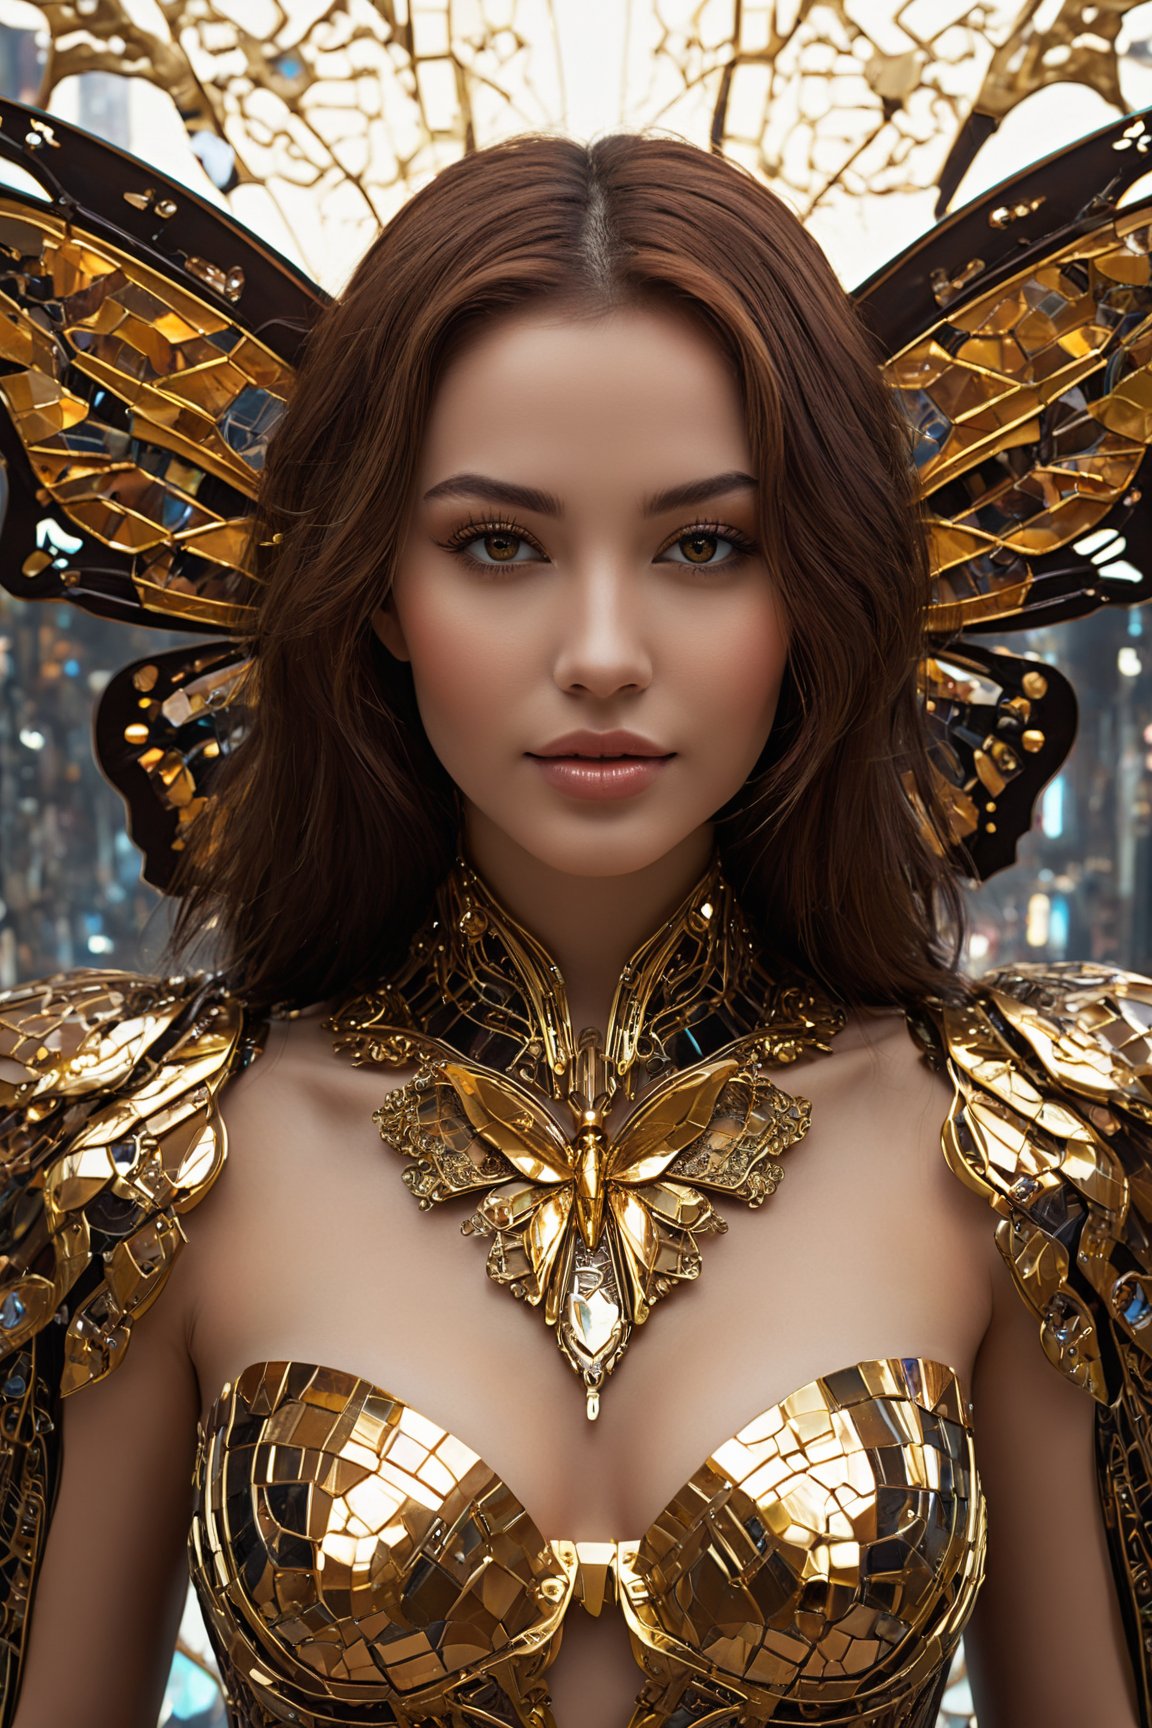 (masterful composition, cutting-edge) artwork that skillfully fuses the realms of cyberpunk and dreamlike surrealism. Immerse yourself in a world where a stunning cyborg, with (exquisite, intricate) details and luscious brown hair, radiates a charming smile. Her cyber enhancements showcase a (gilded butterfly filigree) that adds an air of enchantment. The backdrop features a surreal landscape of (shattered mirrors), creating a mesmerizing and visually dynamic masterpiece that blurs the lines between reality and fantasy.